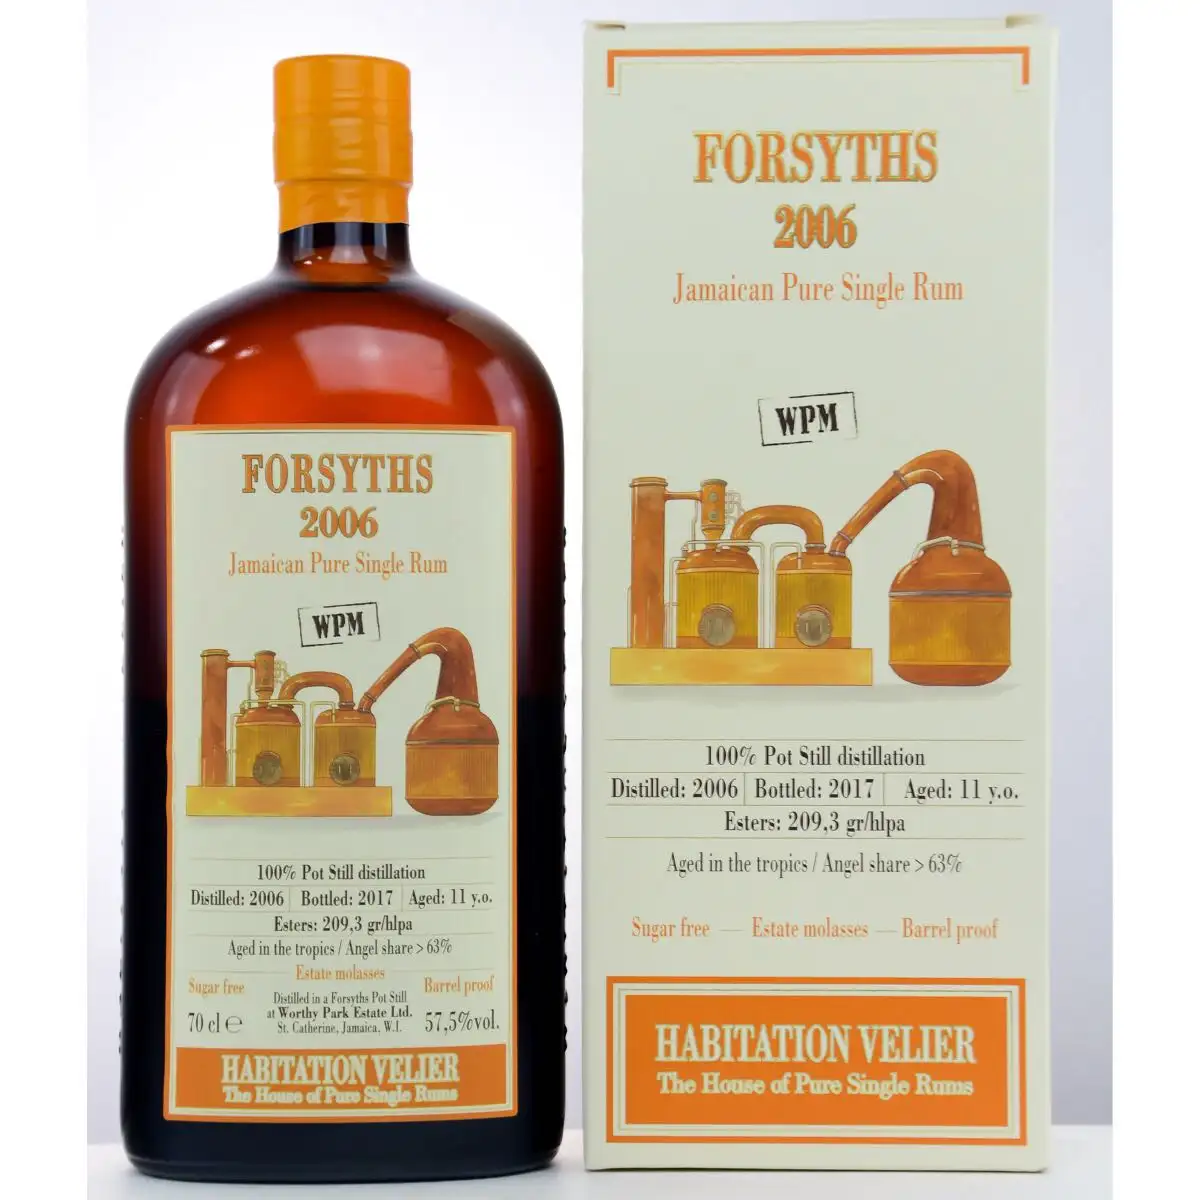 Image of the front of the bottle of the rum Forsyths WPM